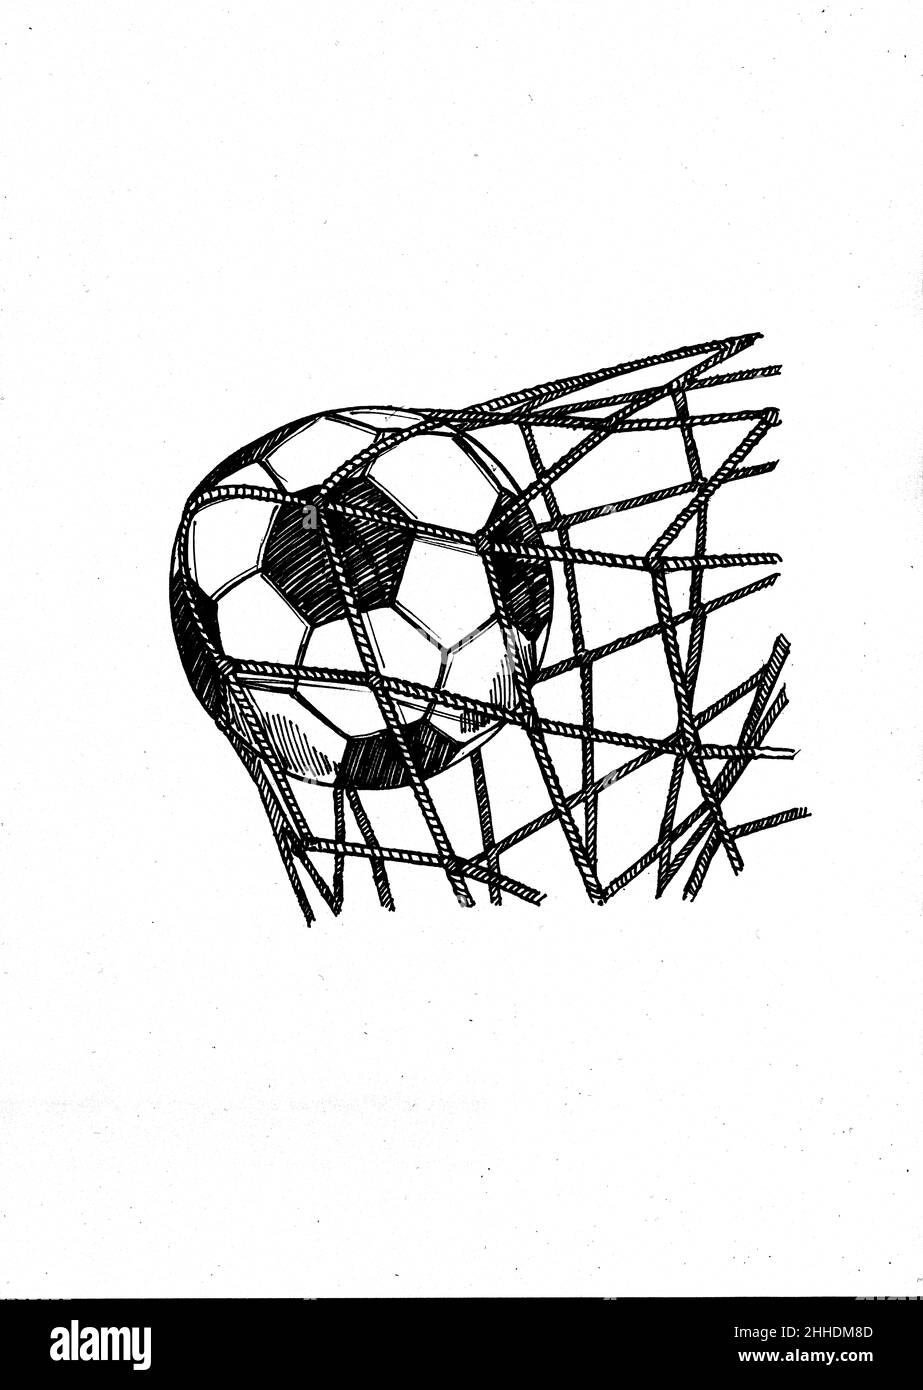 Sketch of a football hitting the back of a goal net. Stock Photo